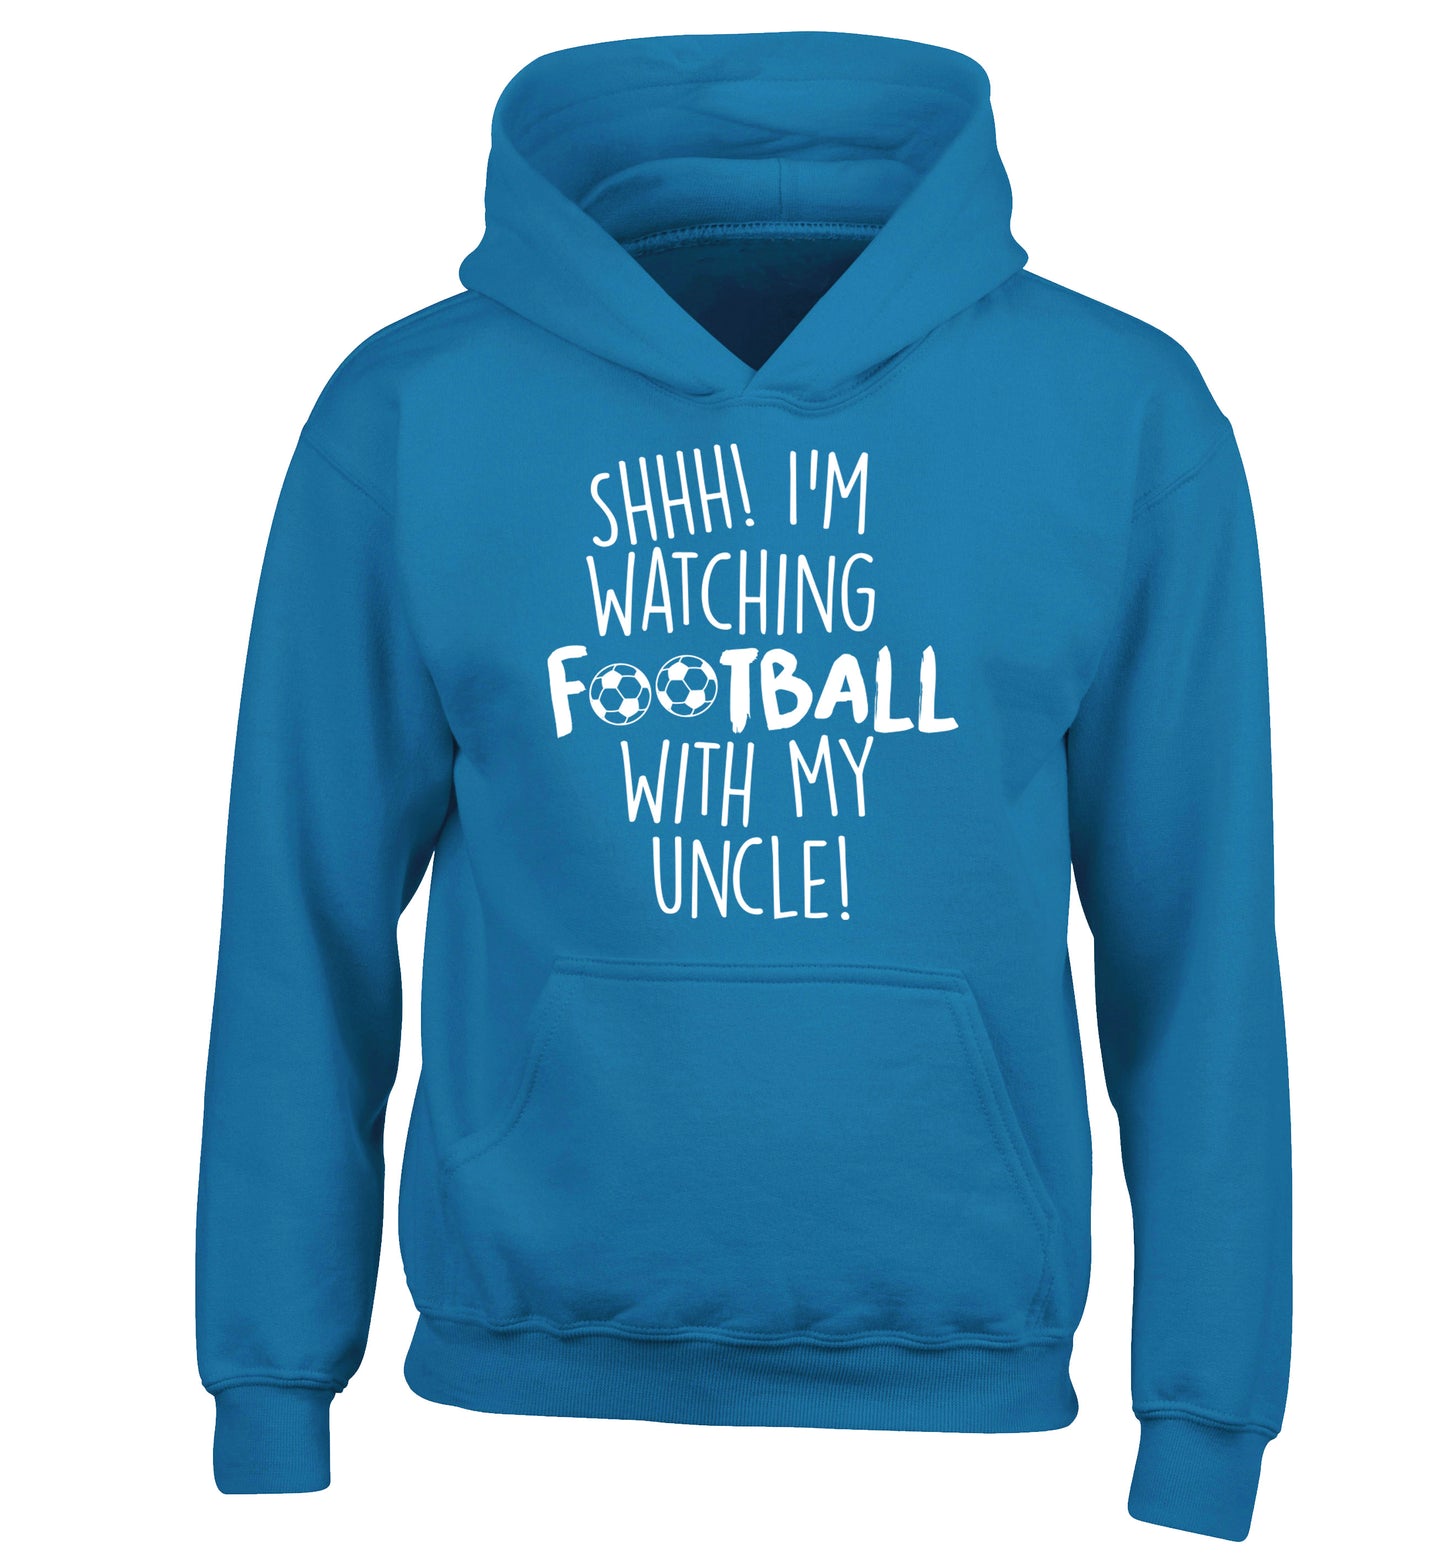 Shhh I'm watching football with my uncle children's blue hoodie 12-14 Years